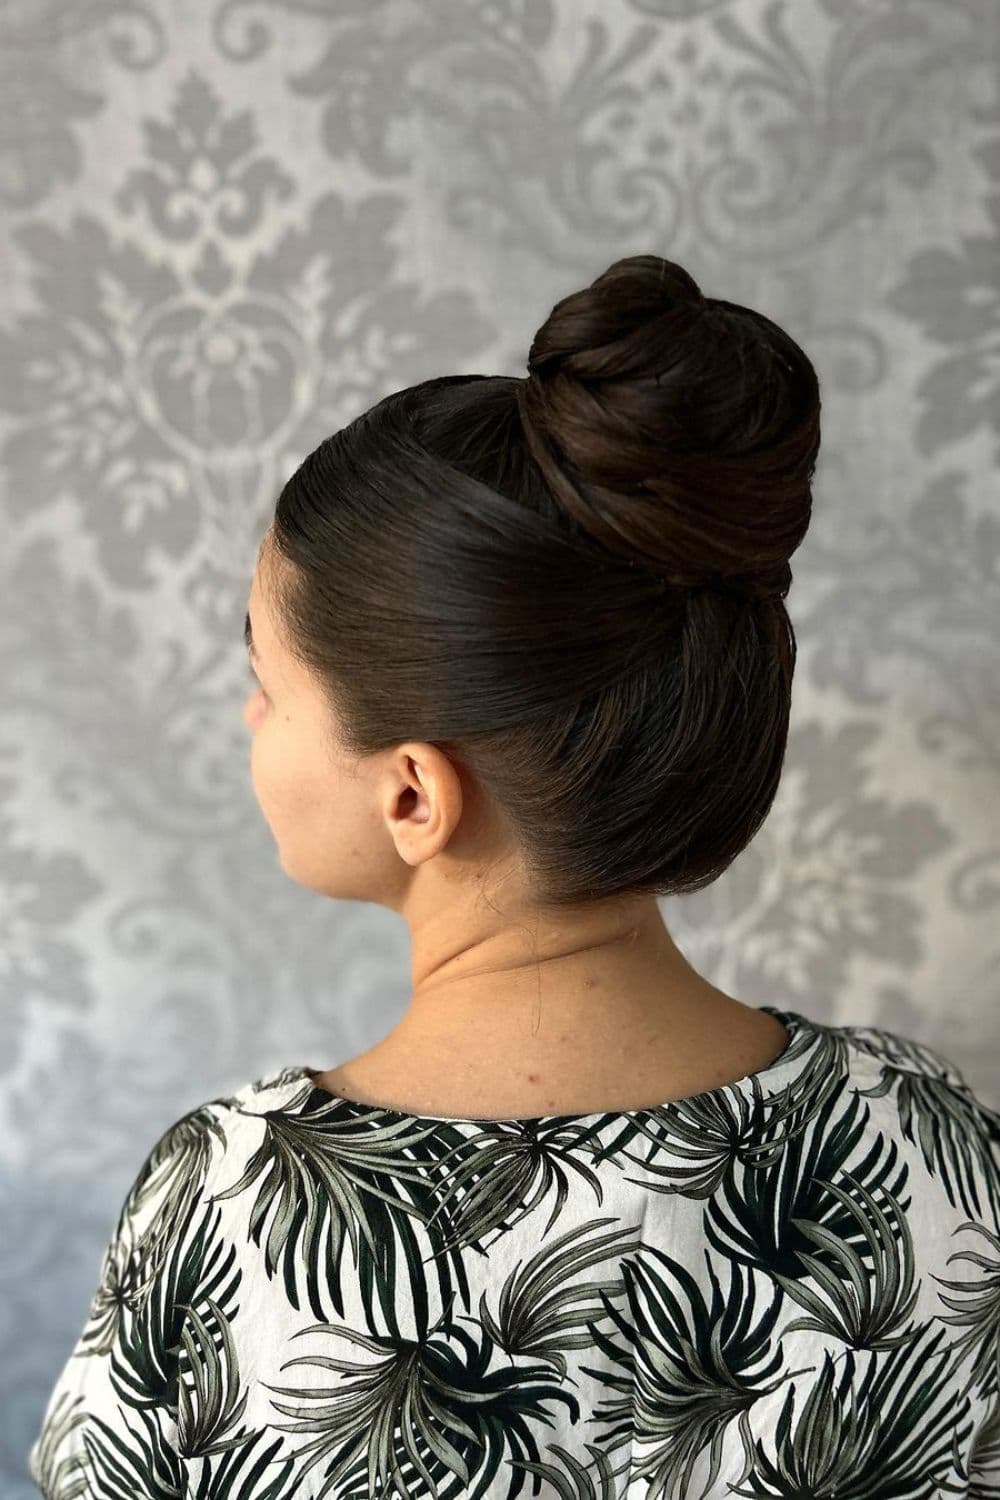 A woman with a high bun hairstyle.